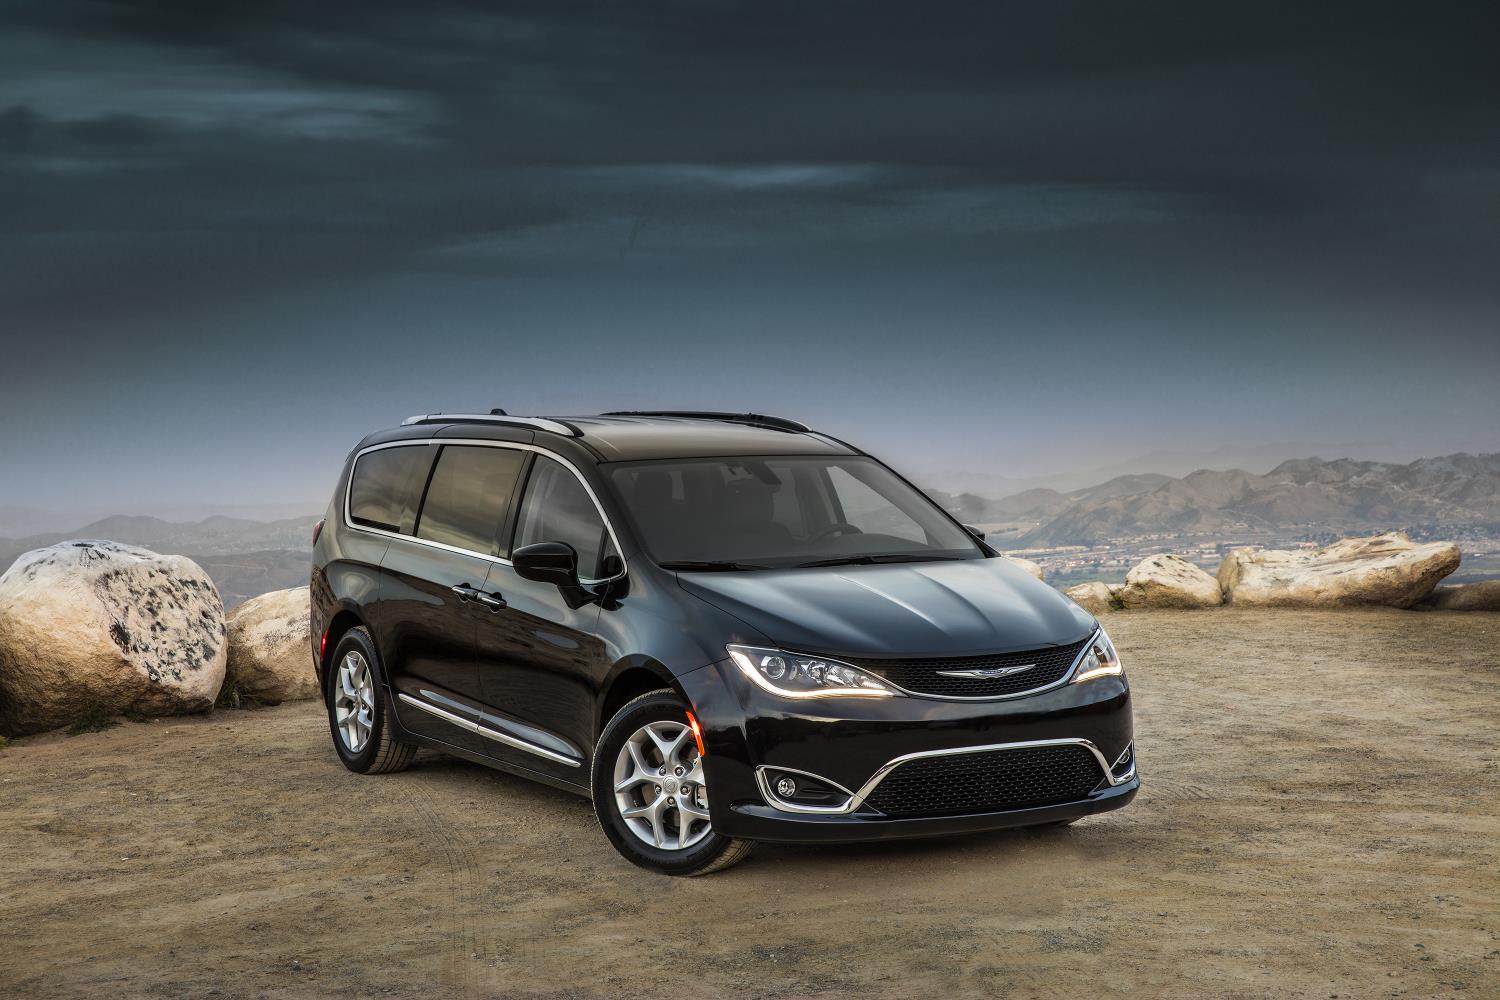 2017 Chrysler Pacifica Touring Plus Trim Announced With